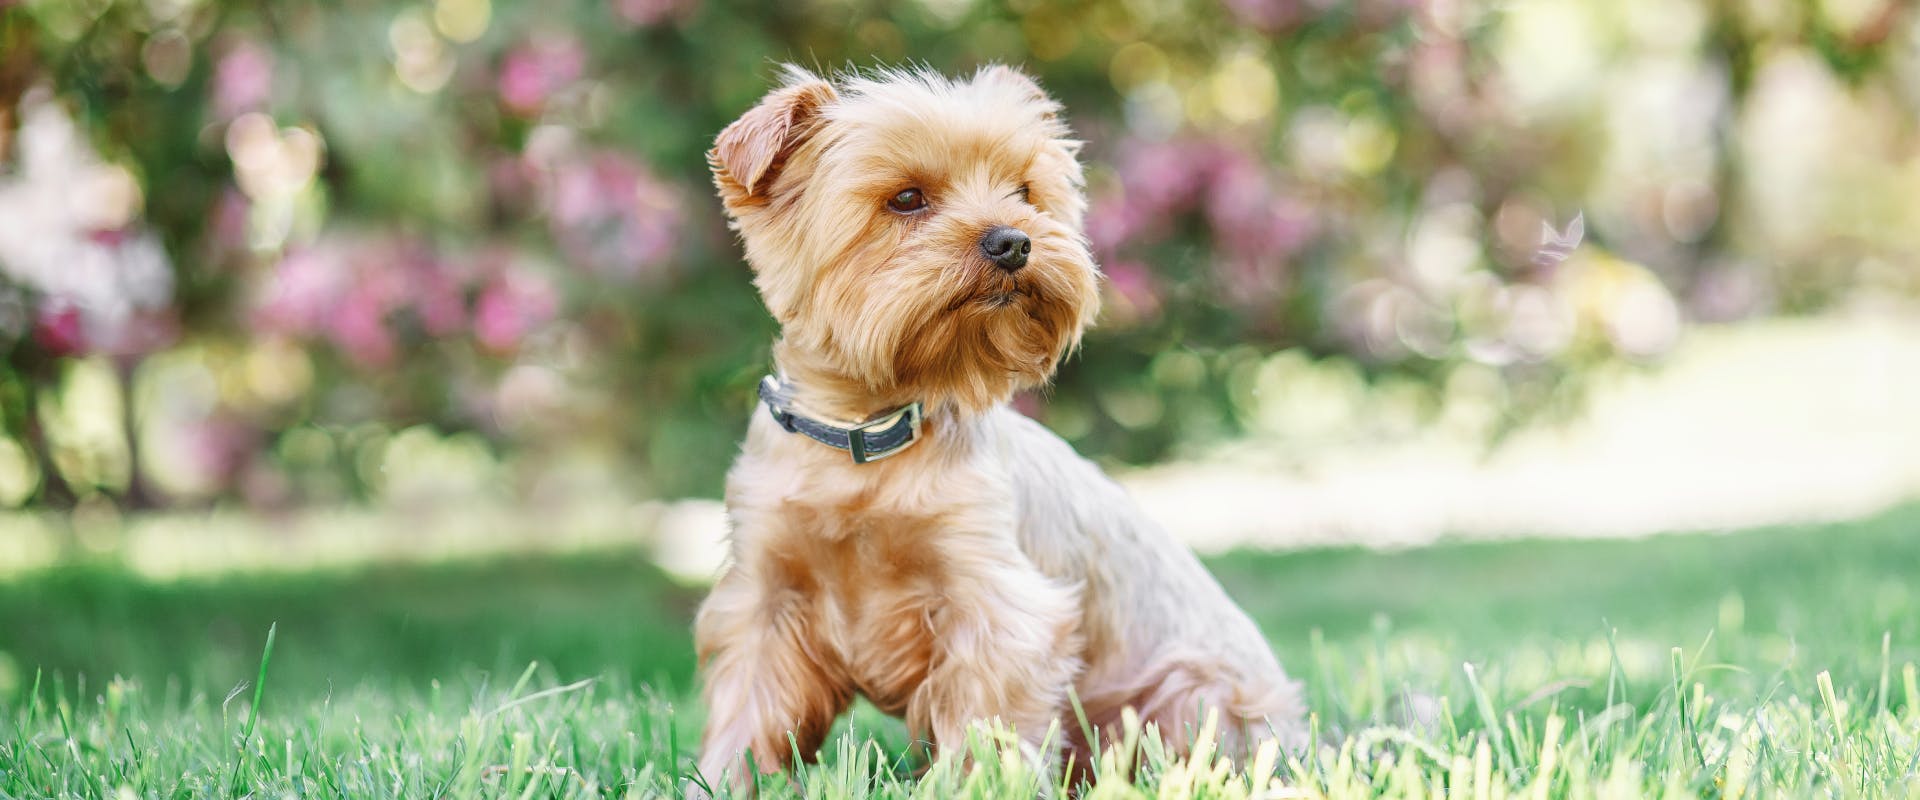 yorkshire terrier sitting in a park with pink flowers in the background